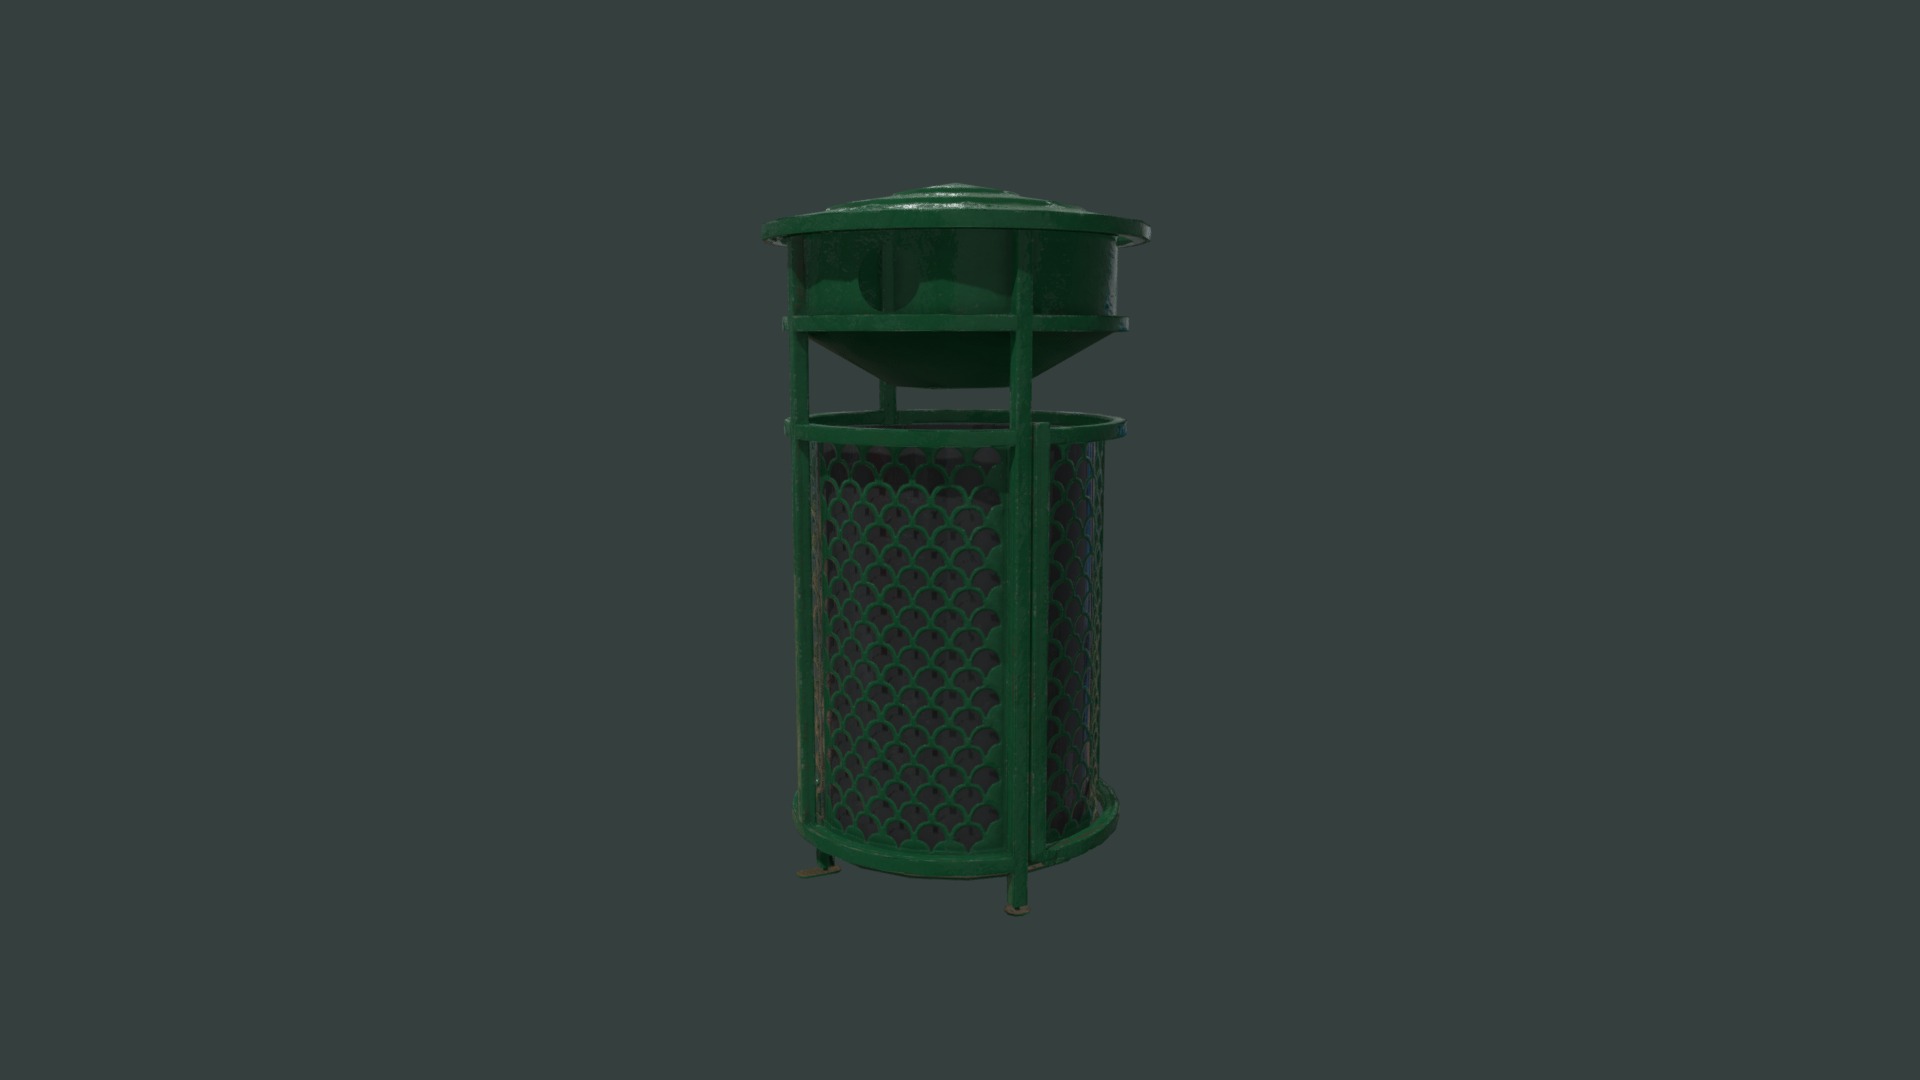 3D model Trash Can – Ready to Unity HDRP - This is a 3D model of the Trash Can - Ready to Unity HDRP. The 3D model is about a green and white glass container.